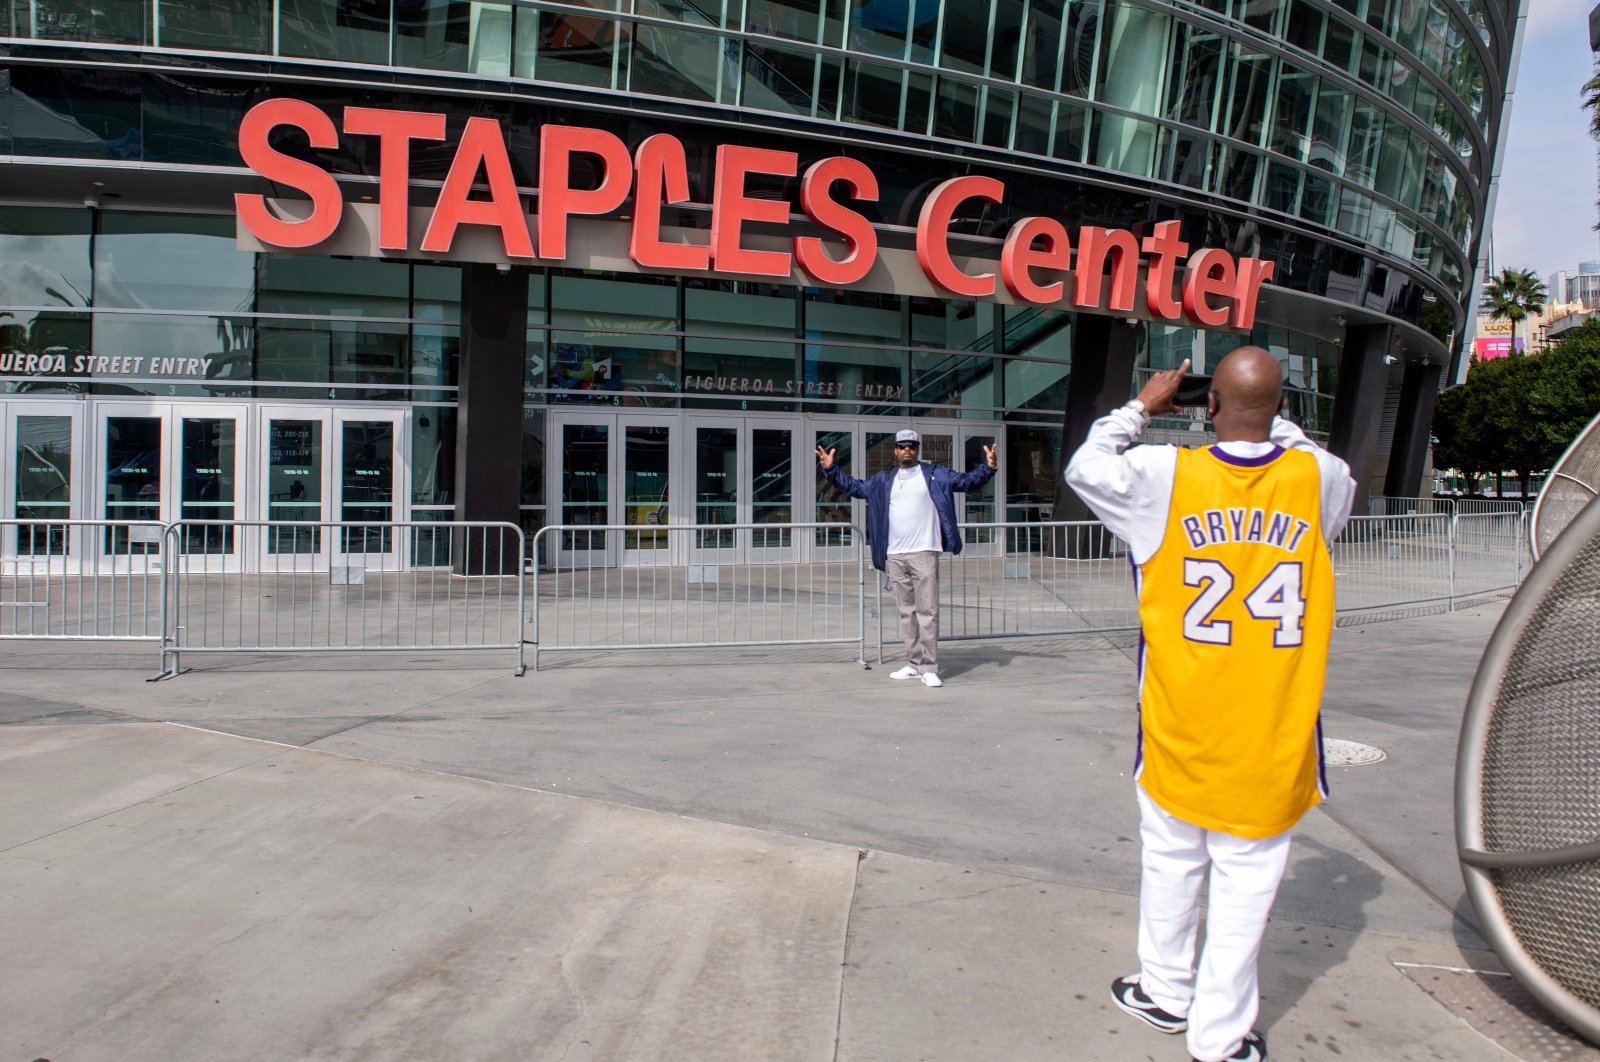 People take photos in front of the Staples Center, in Los Angeles, U.S., March 14, 2021. (AFP Photo)